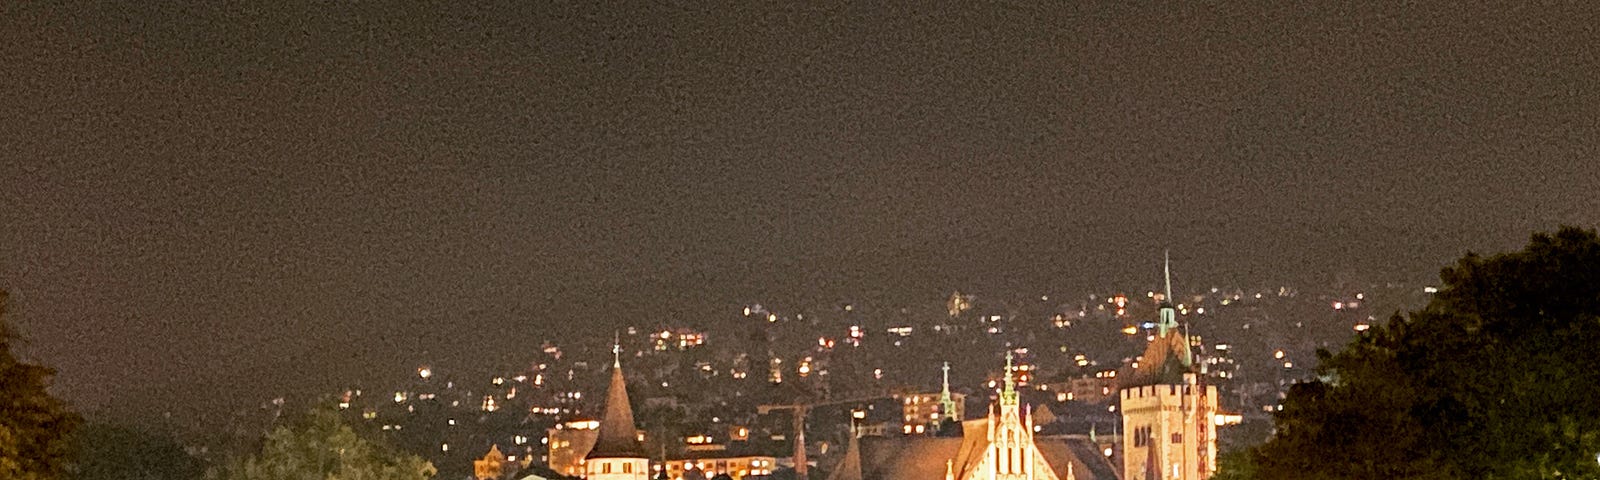 Lights shine out across stunning Zurich at night.